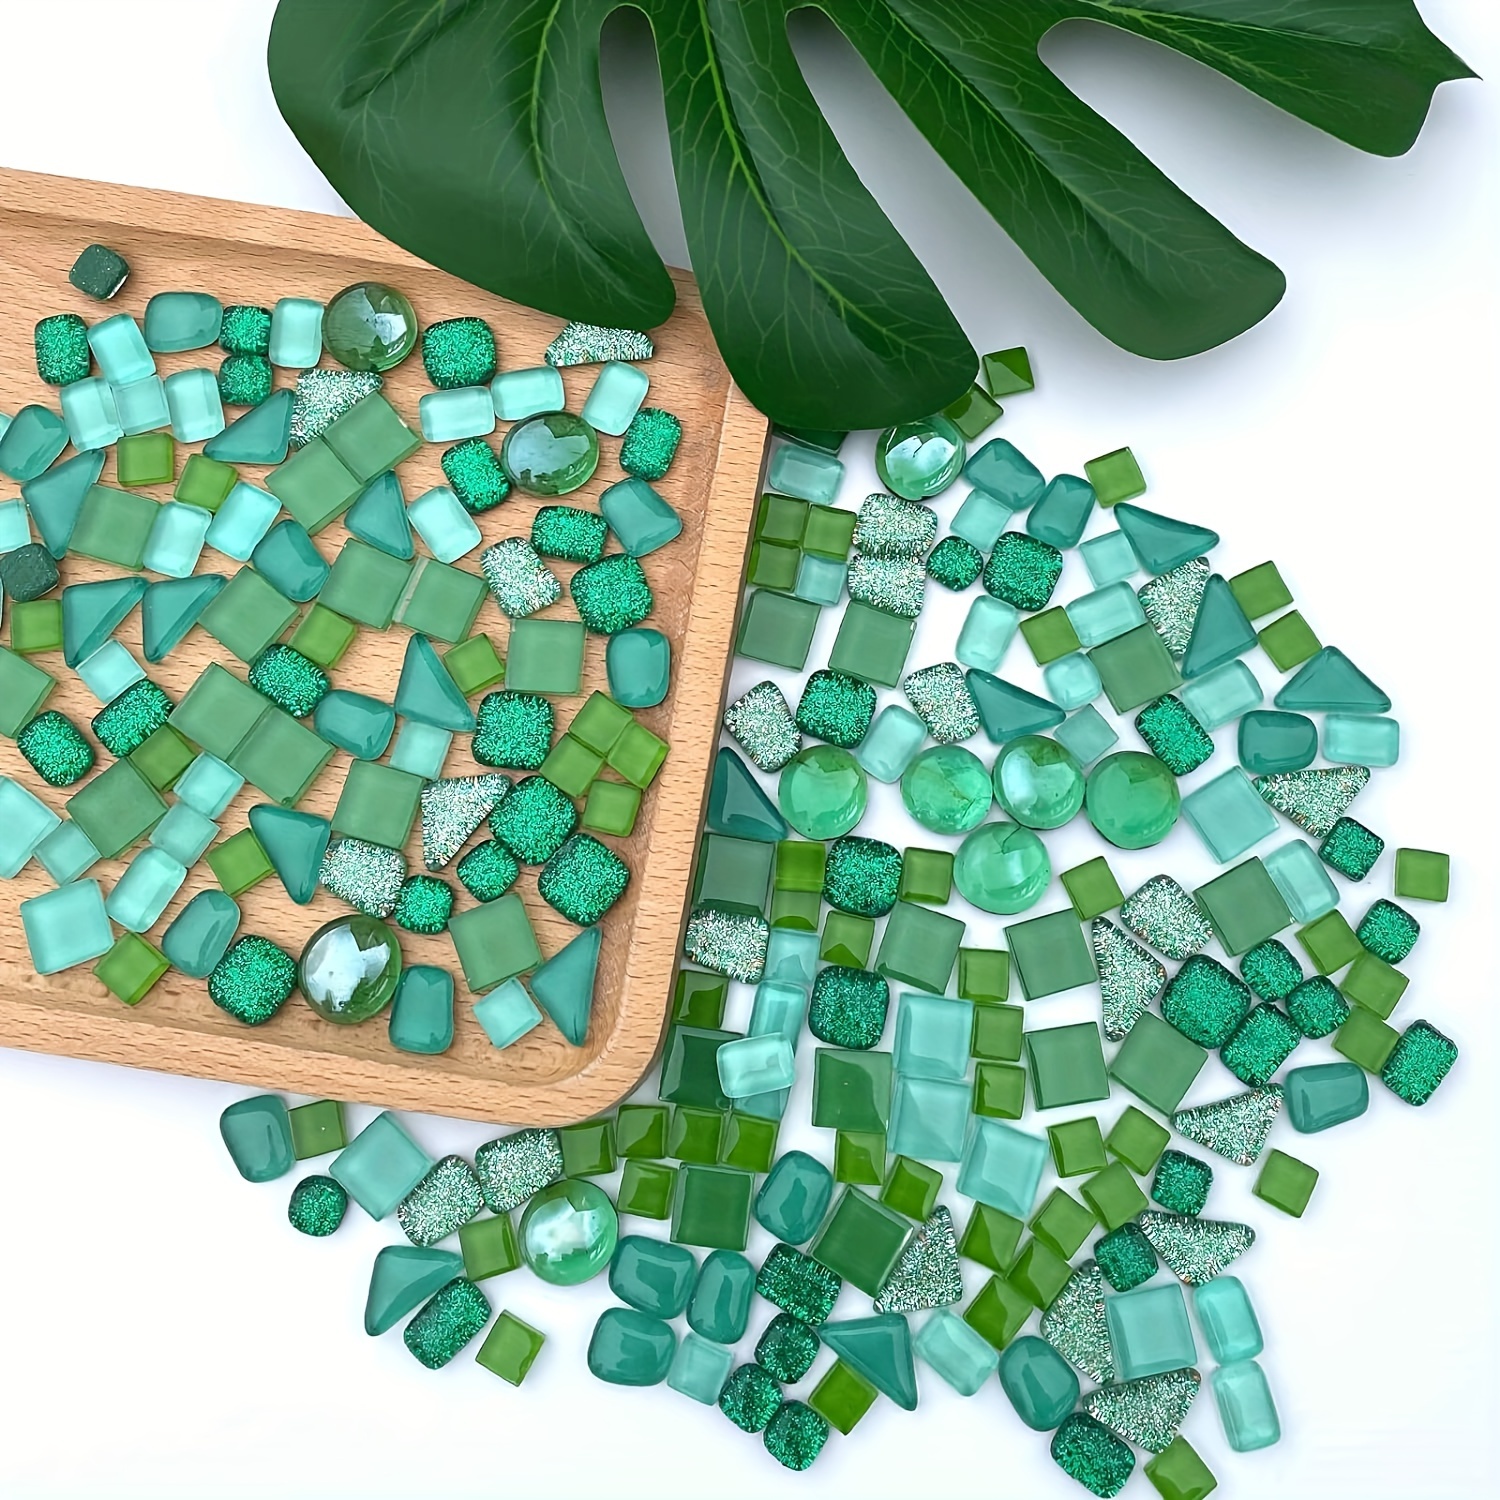 

100g Vibrant Green Crystal Glass Mosaic Tiles For Diy Crafts & Jewelry Making - Perfect For Handmade Projects